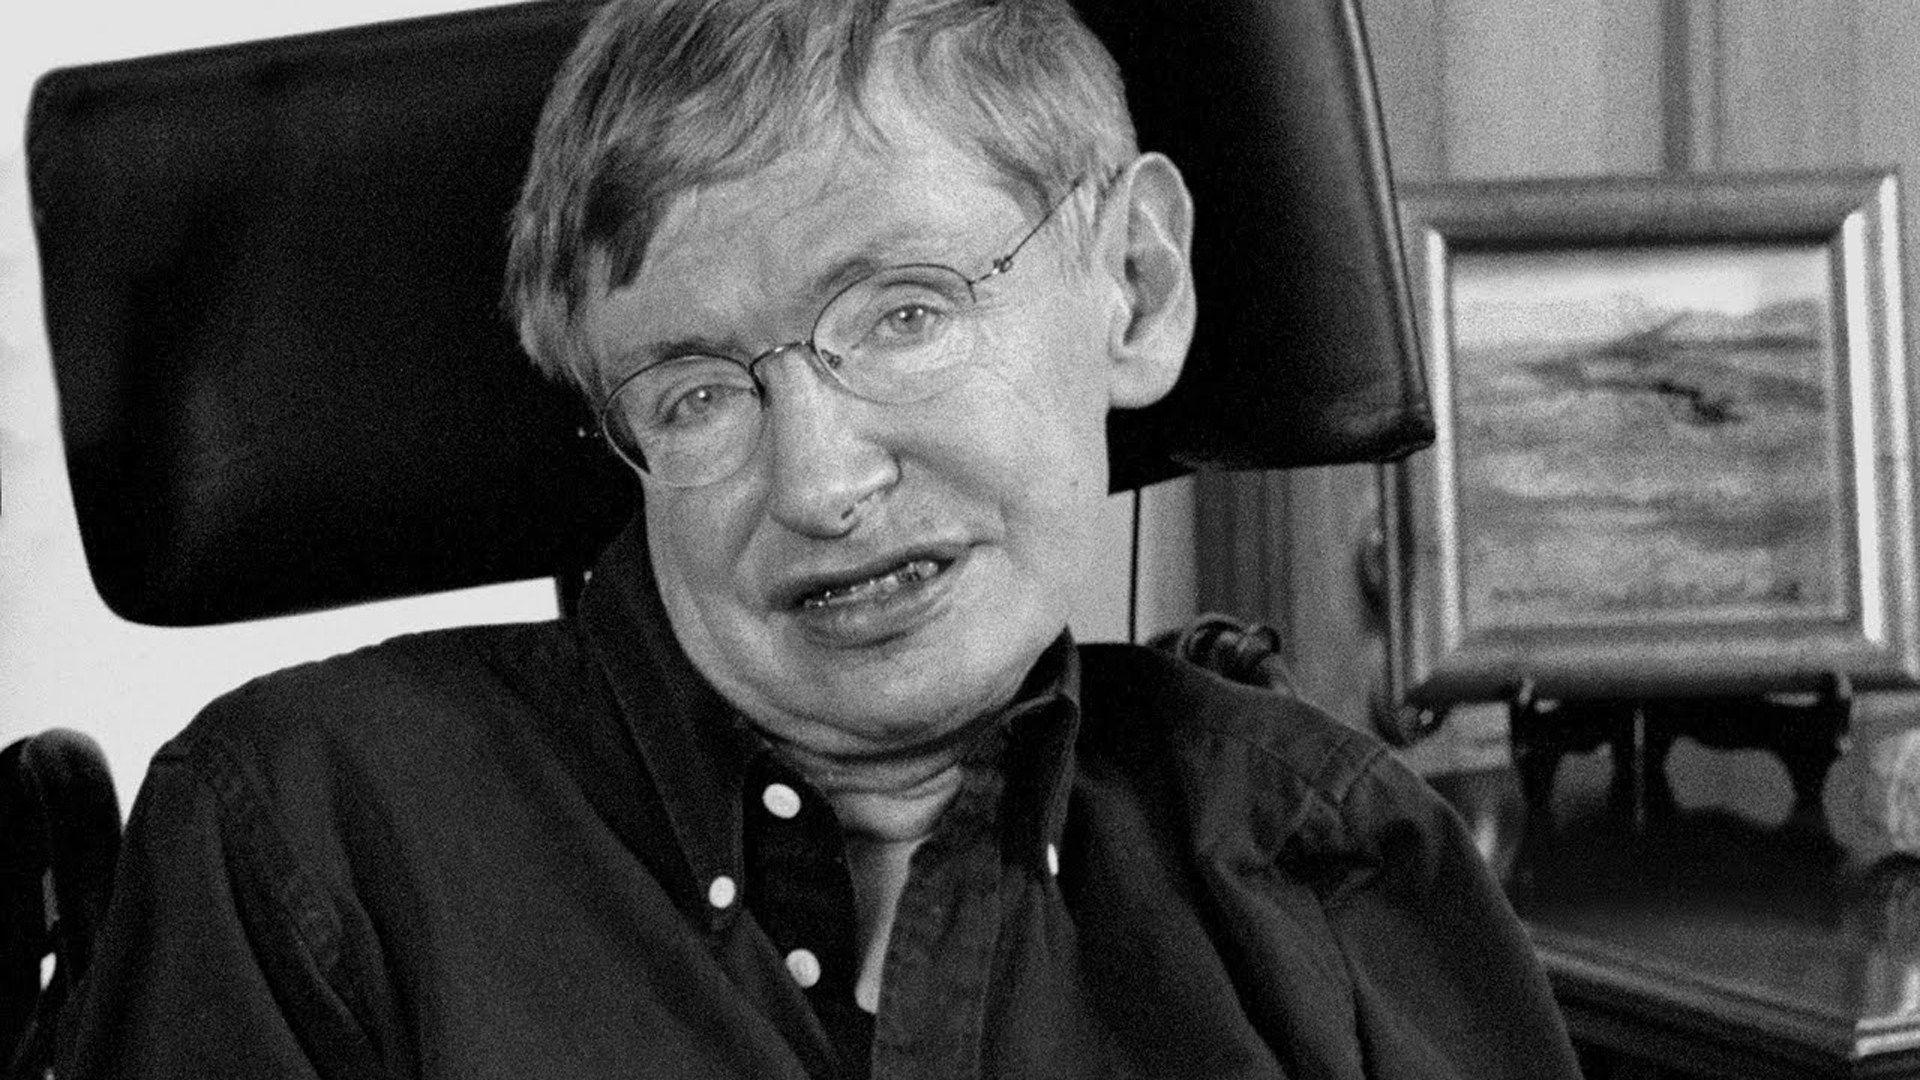 Stephen Hawking wallpapers, Cool backgrounds, Intelligent mind, Science enthusiast, 1920x1080 Full HD Desktop